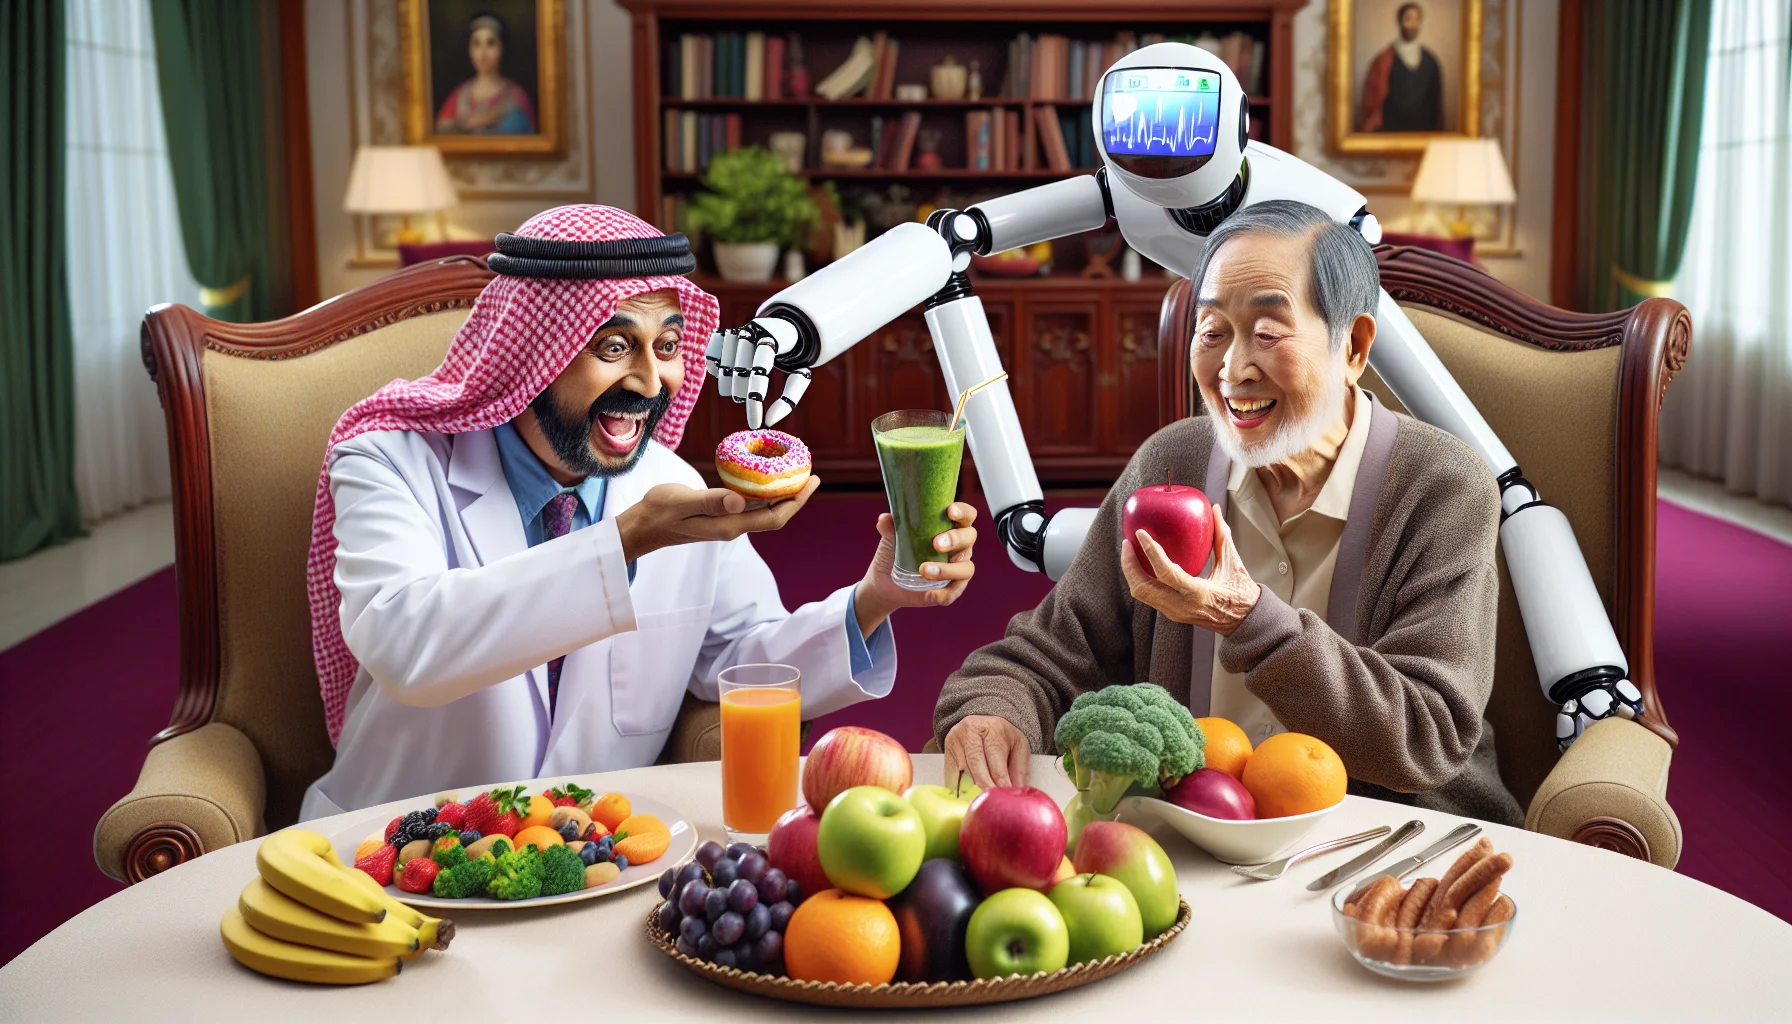 Create a humorous and realistic image of an elderly Middle-Eastern man and a South Asian woman both maintaining a healthy diet after heart surgery. They sit at a lavish dining table filled with colorful fruits and vegetables. To add a touch of comedy, the man attempts to sneak a donut from under the table, but a robotic arm, representing their health monitor, swiftly swoops in and replaces it with an apple. Meanwhile, the woman is cheerfully toasting with a glass of green smoothie. The scene embodies healthy living with a dash of humor.